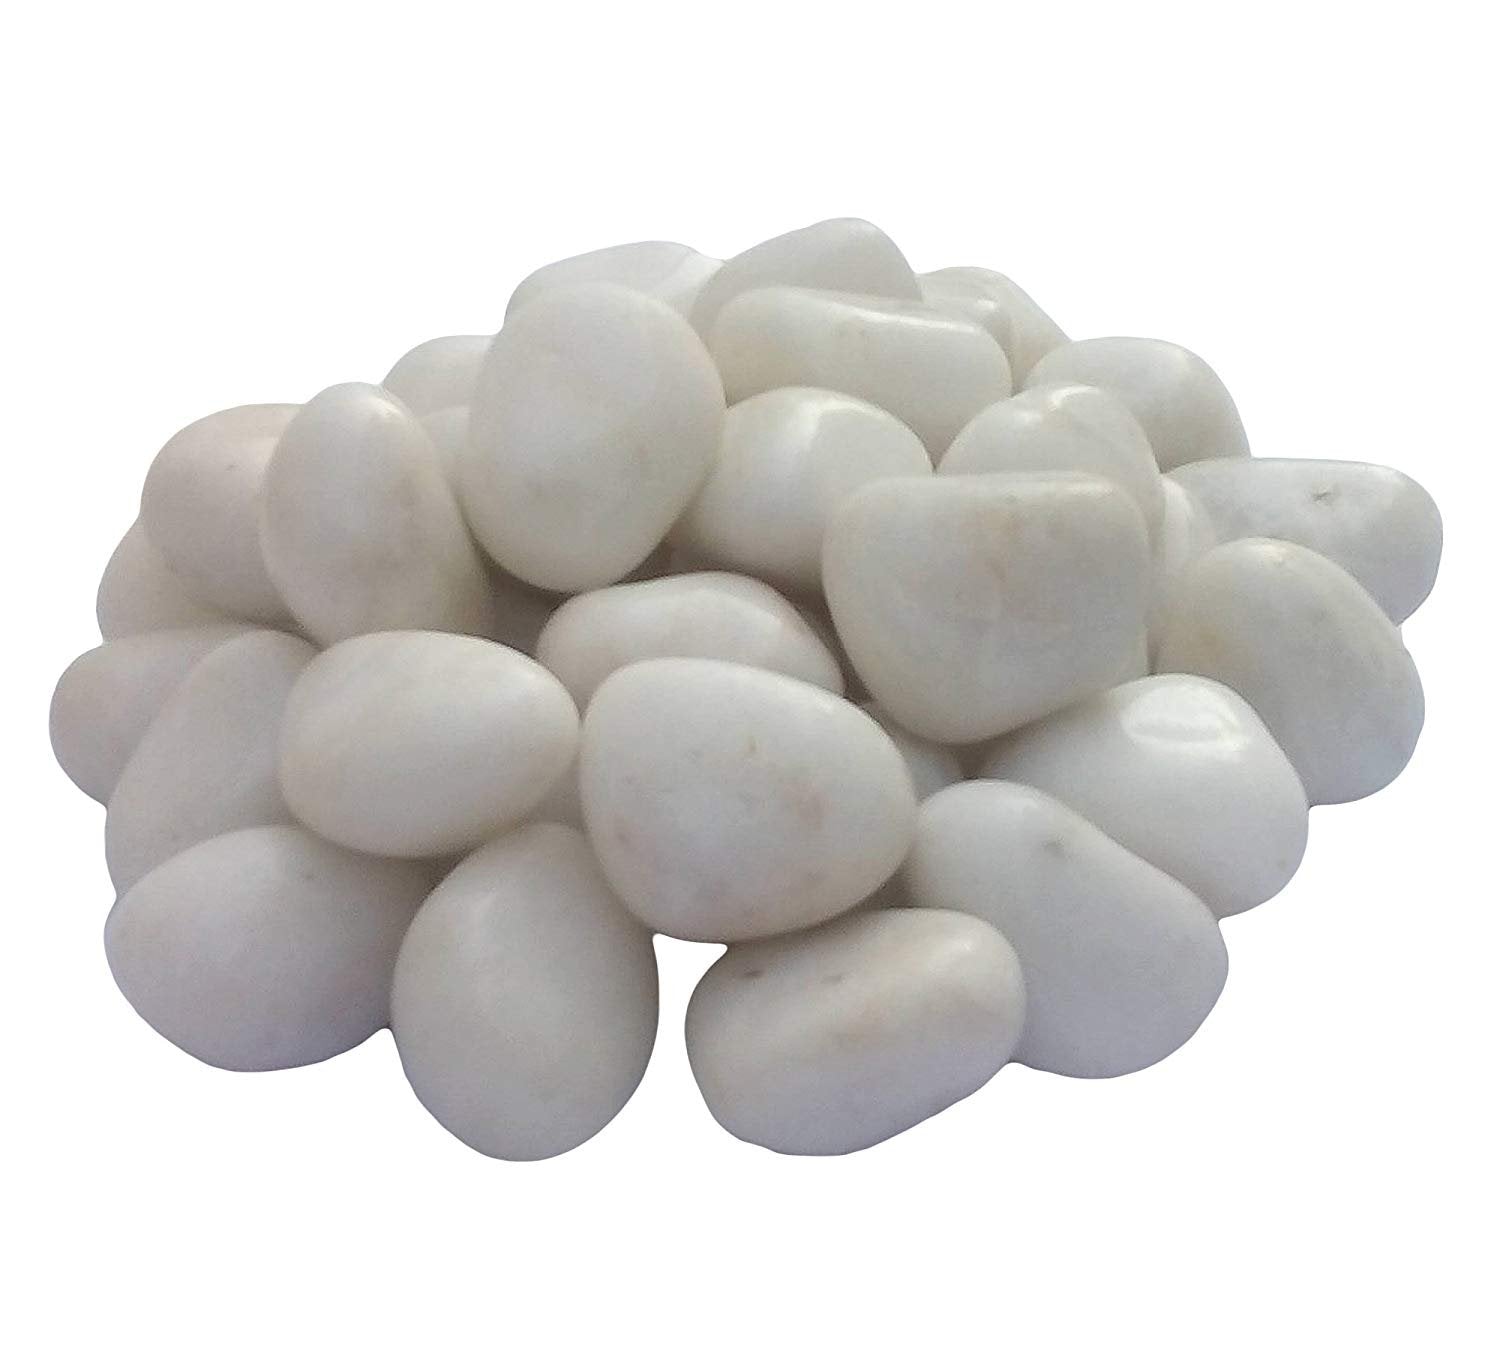 Pebbles Glossy Home Decorative Vase Fillers Stone White, 2 KG